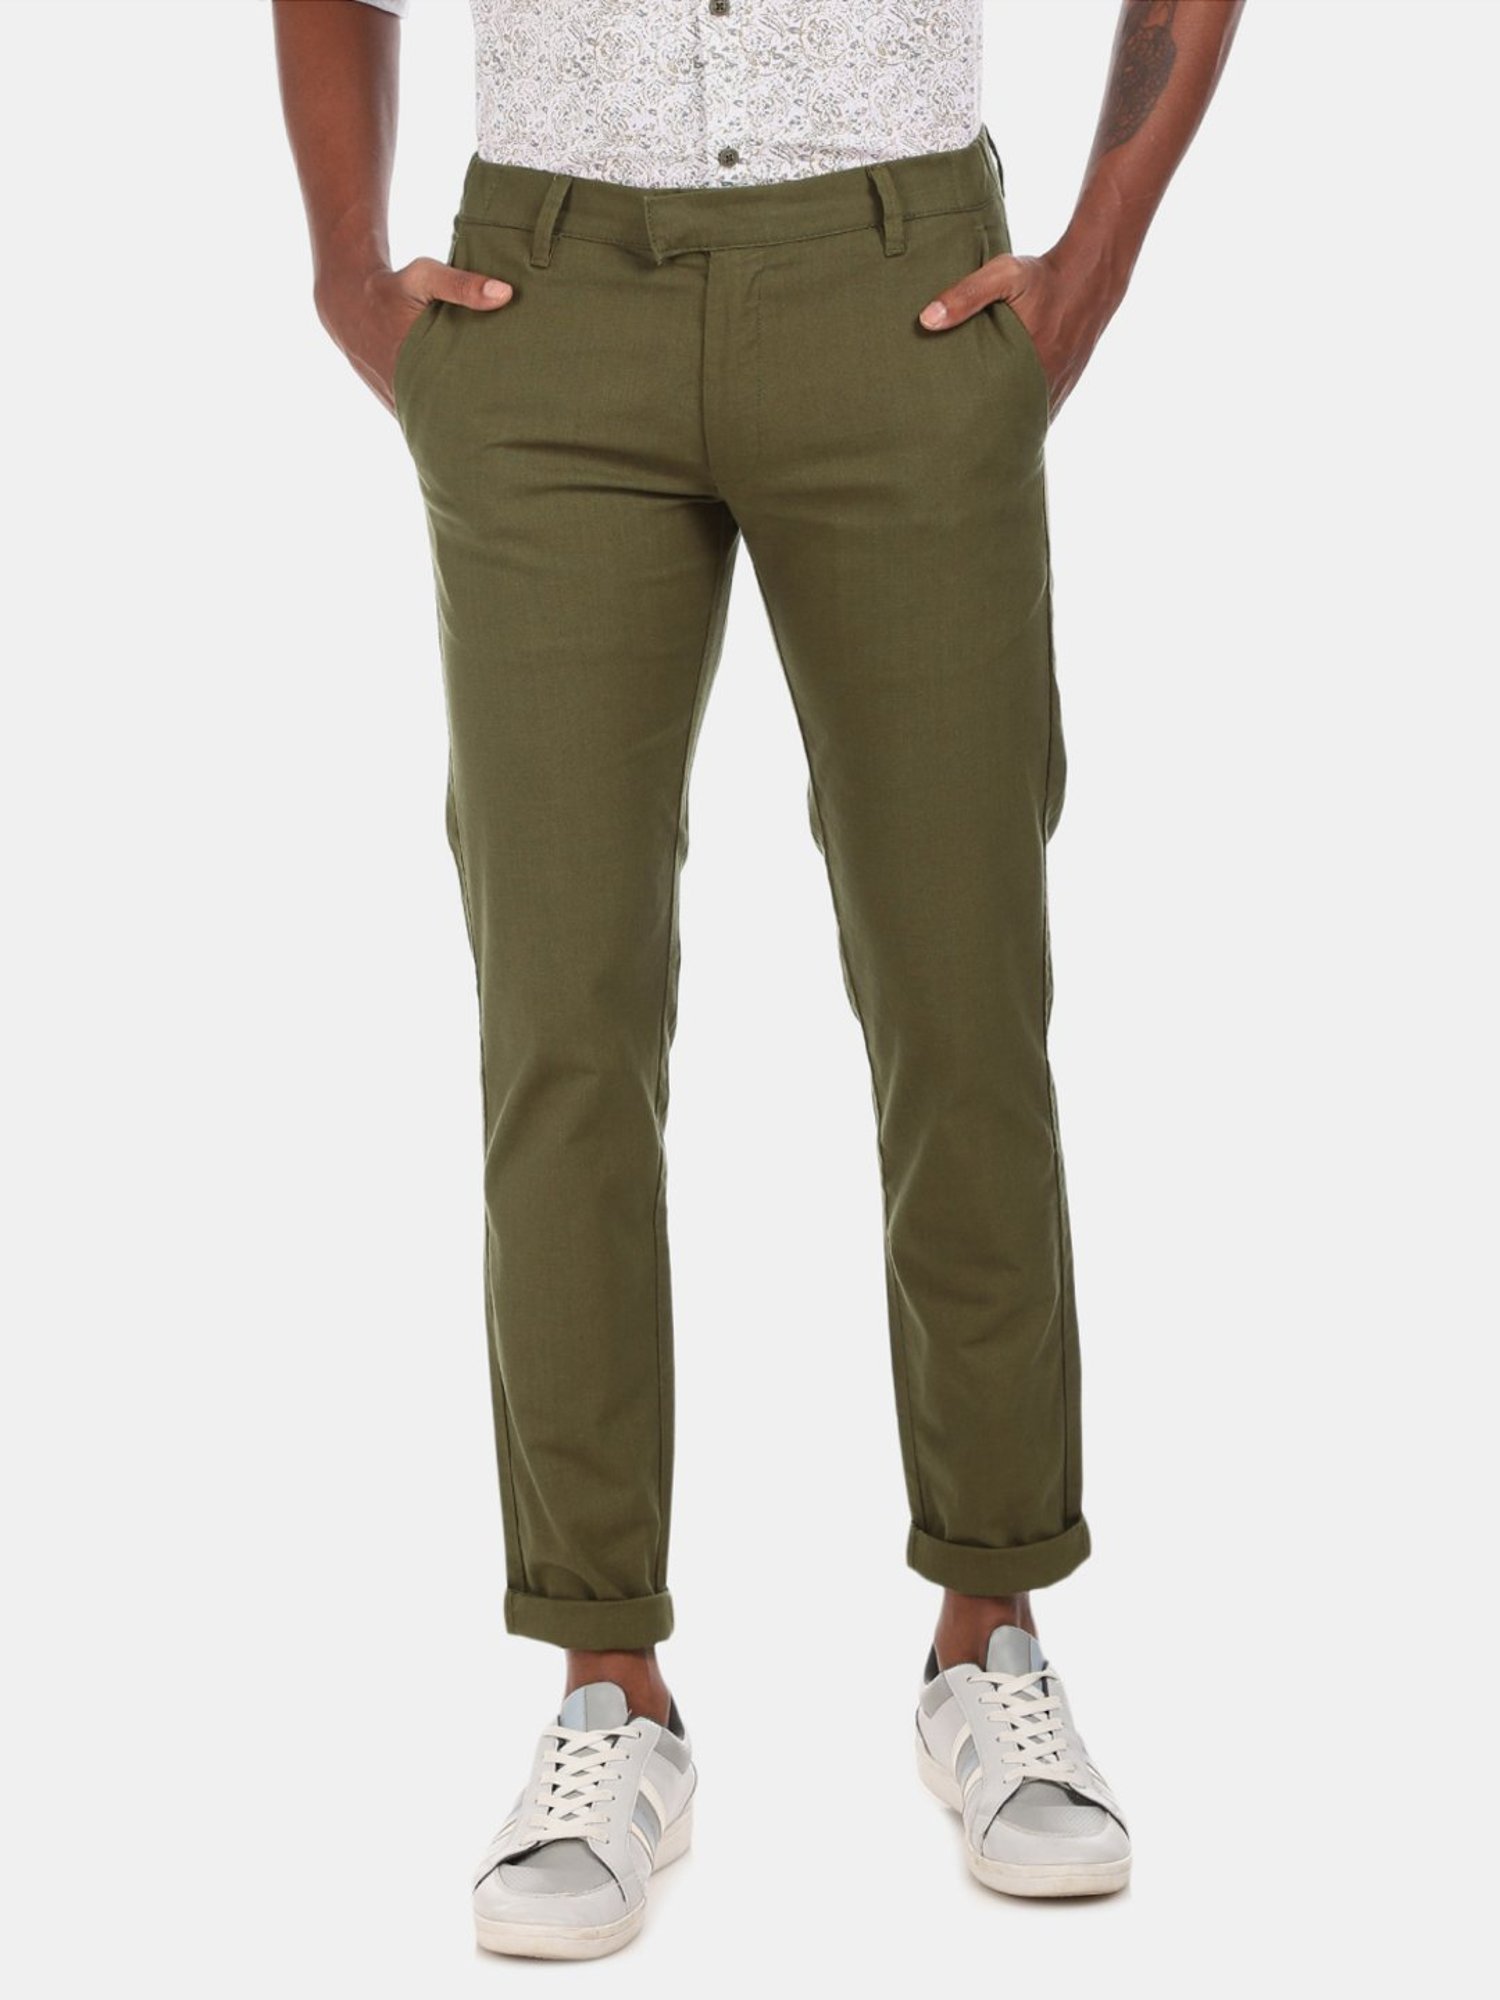 Buy Olive Green Color Cotton Trousers for Women  Regular Fit Cotton   Naariy